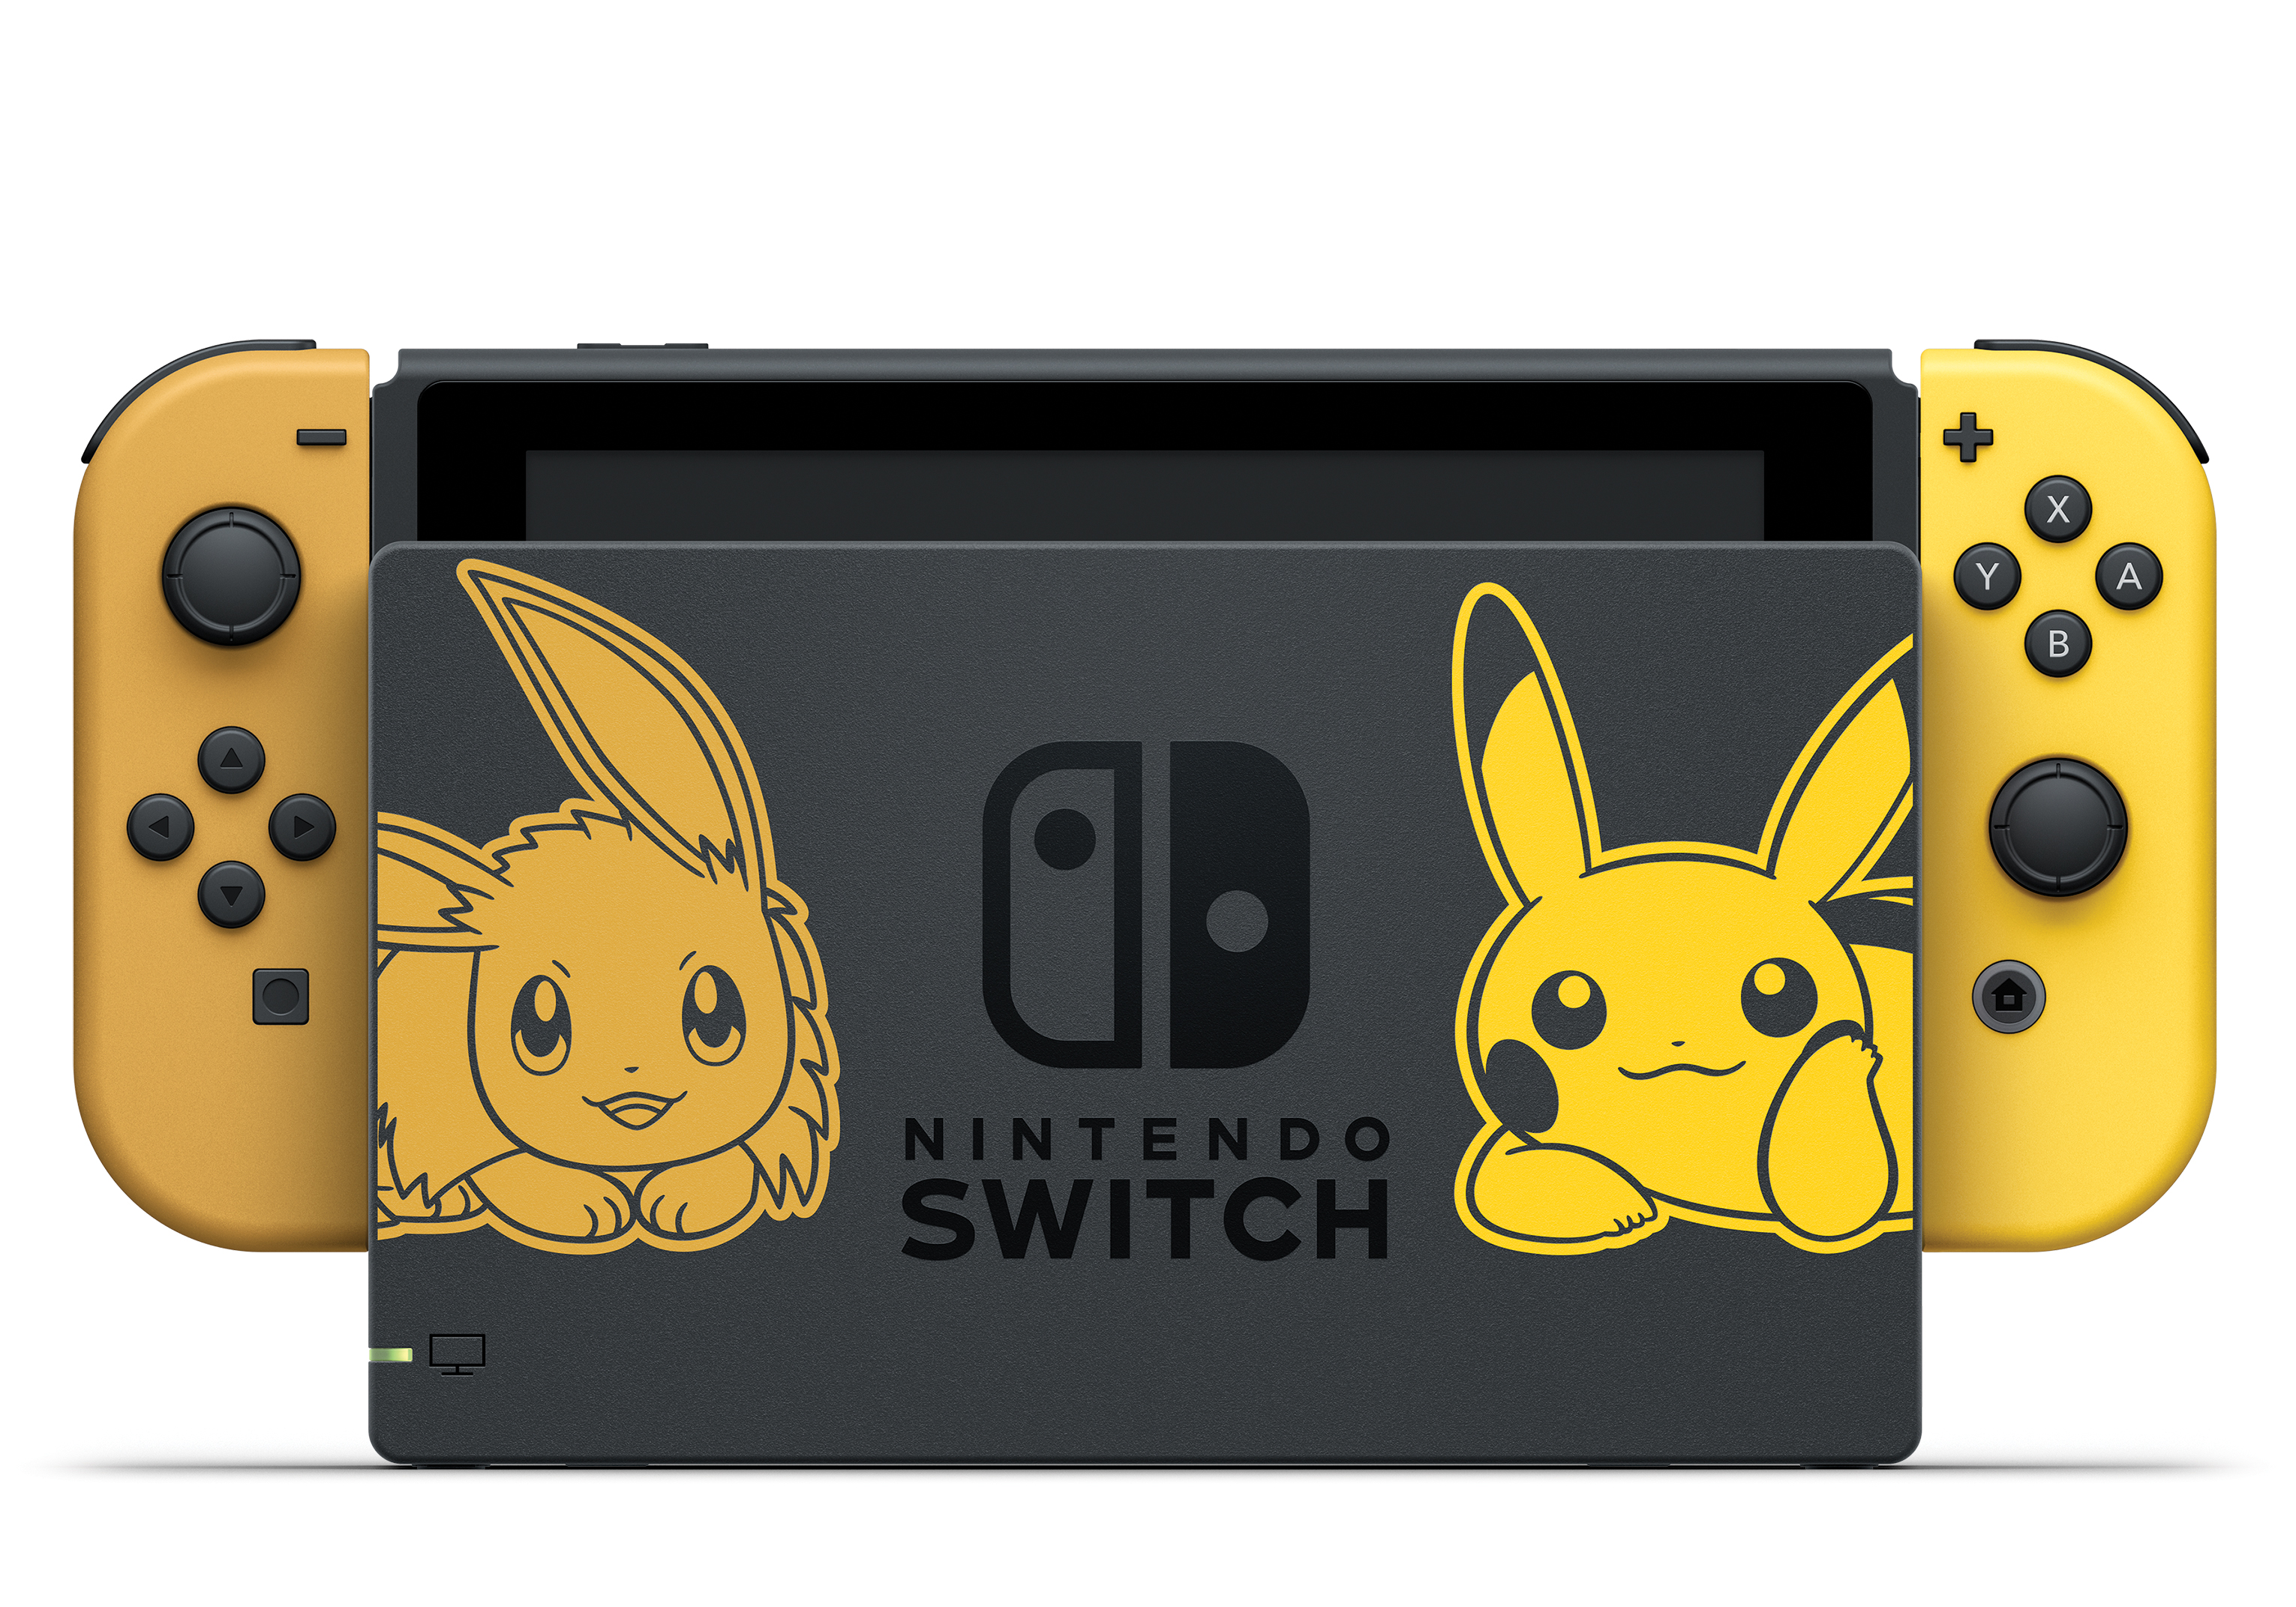 The Pokémon: Let’s Go! Themed Switch is Here to Melt Your Heart